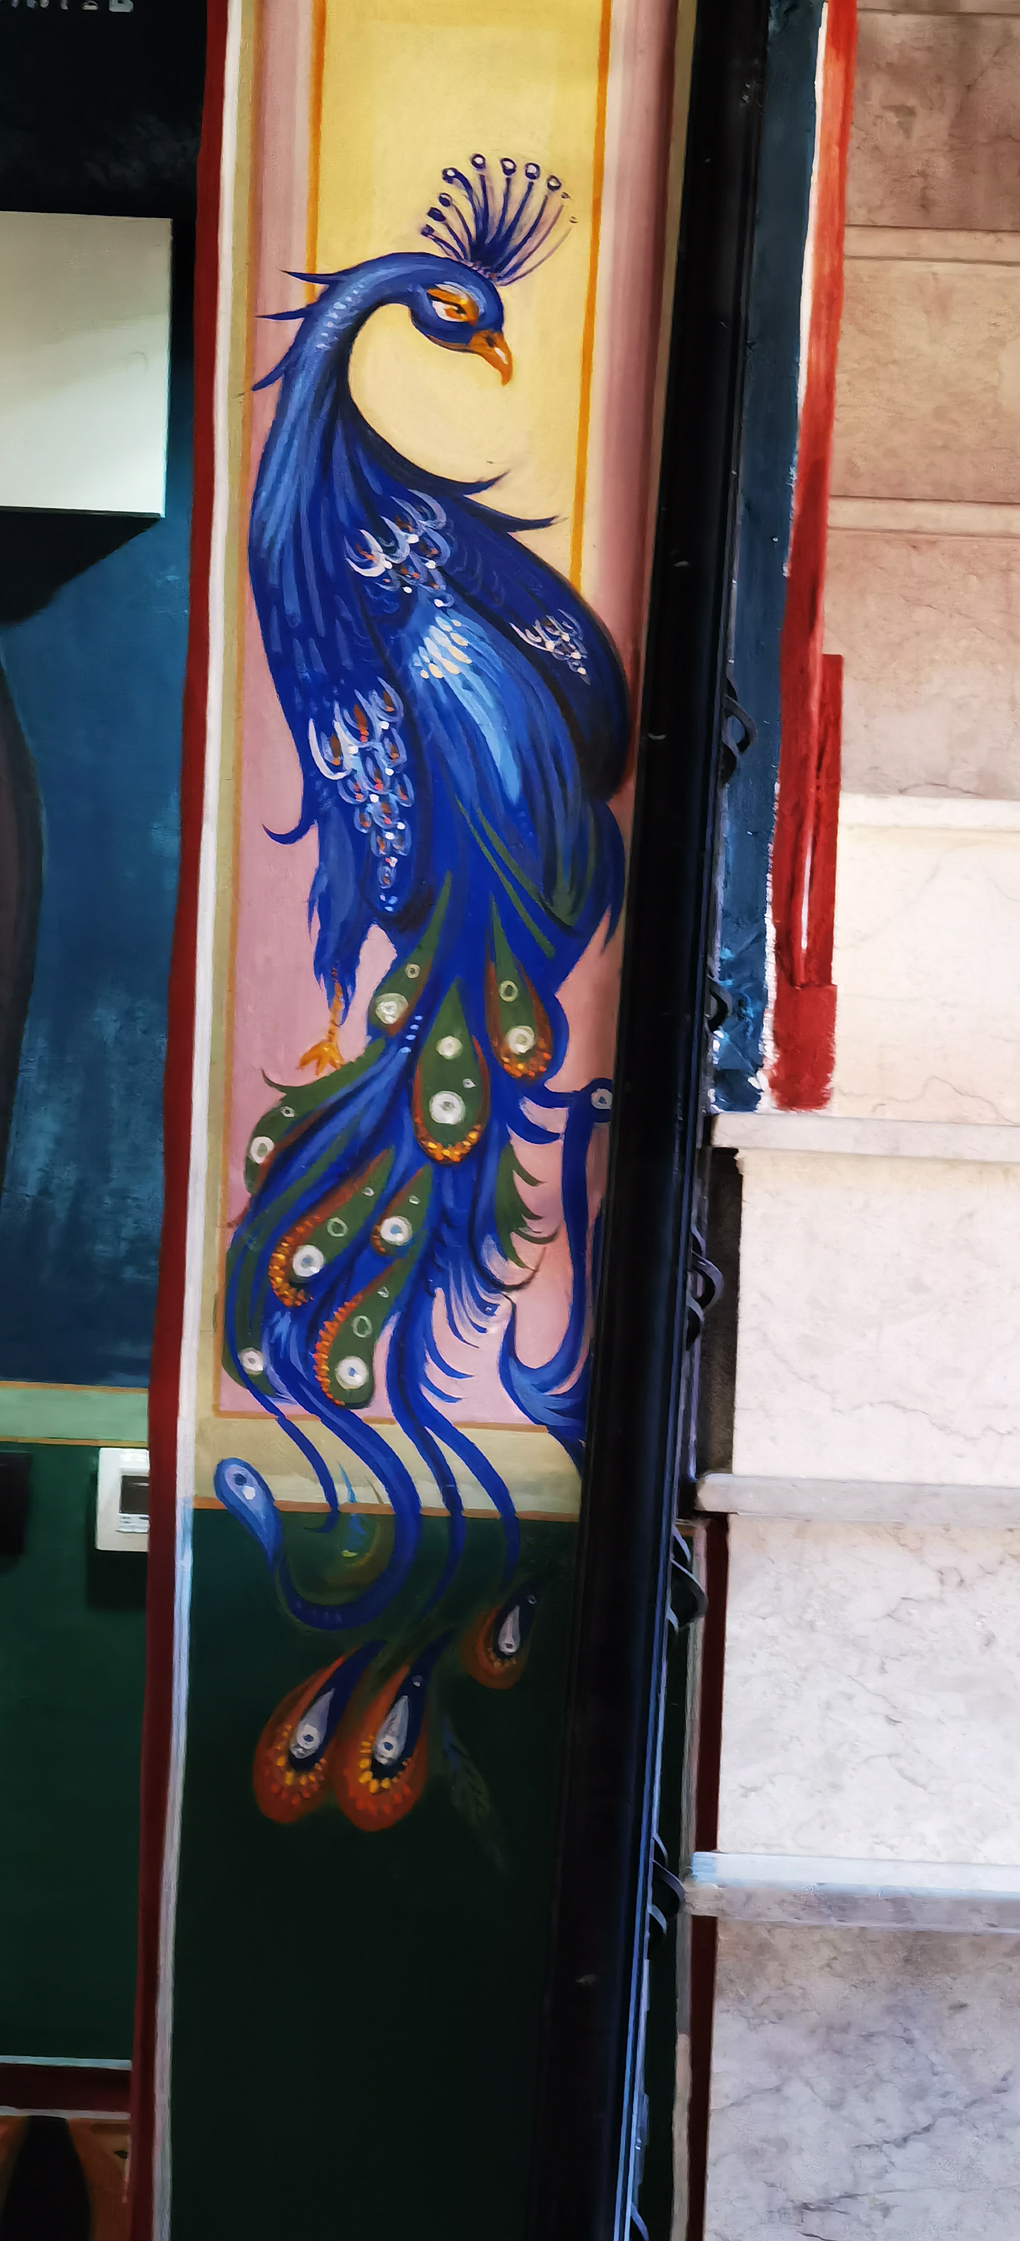 Painted peacock in Orthodox Church